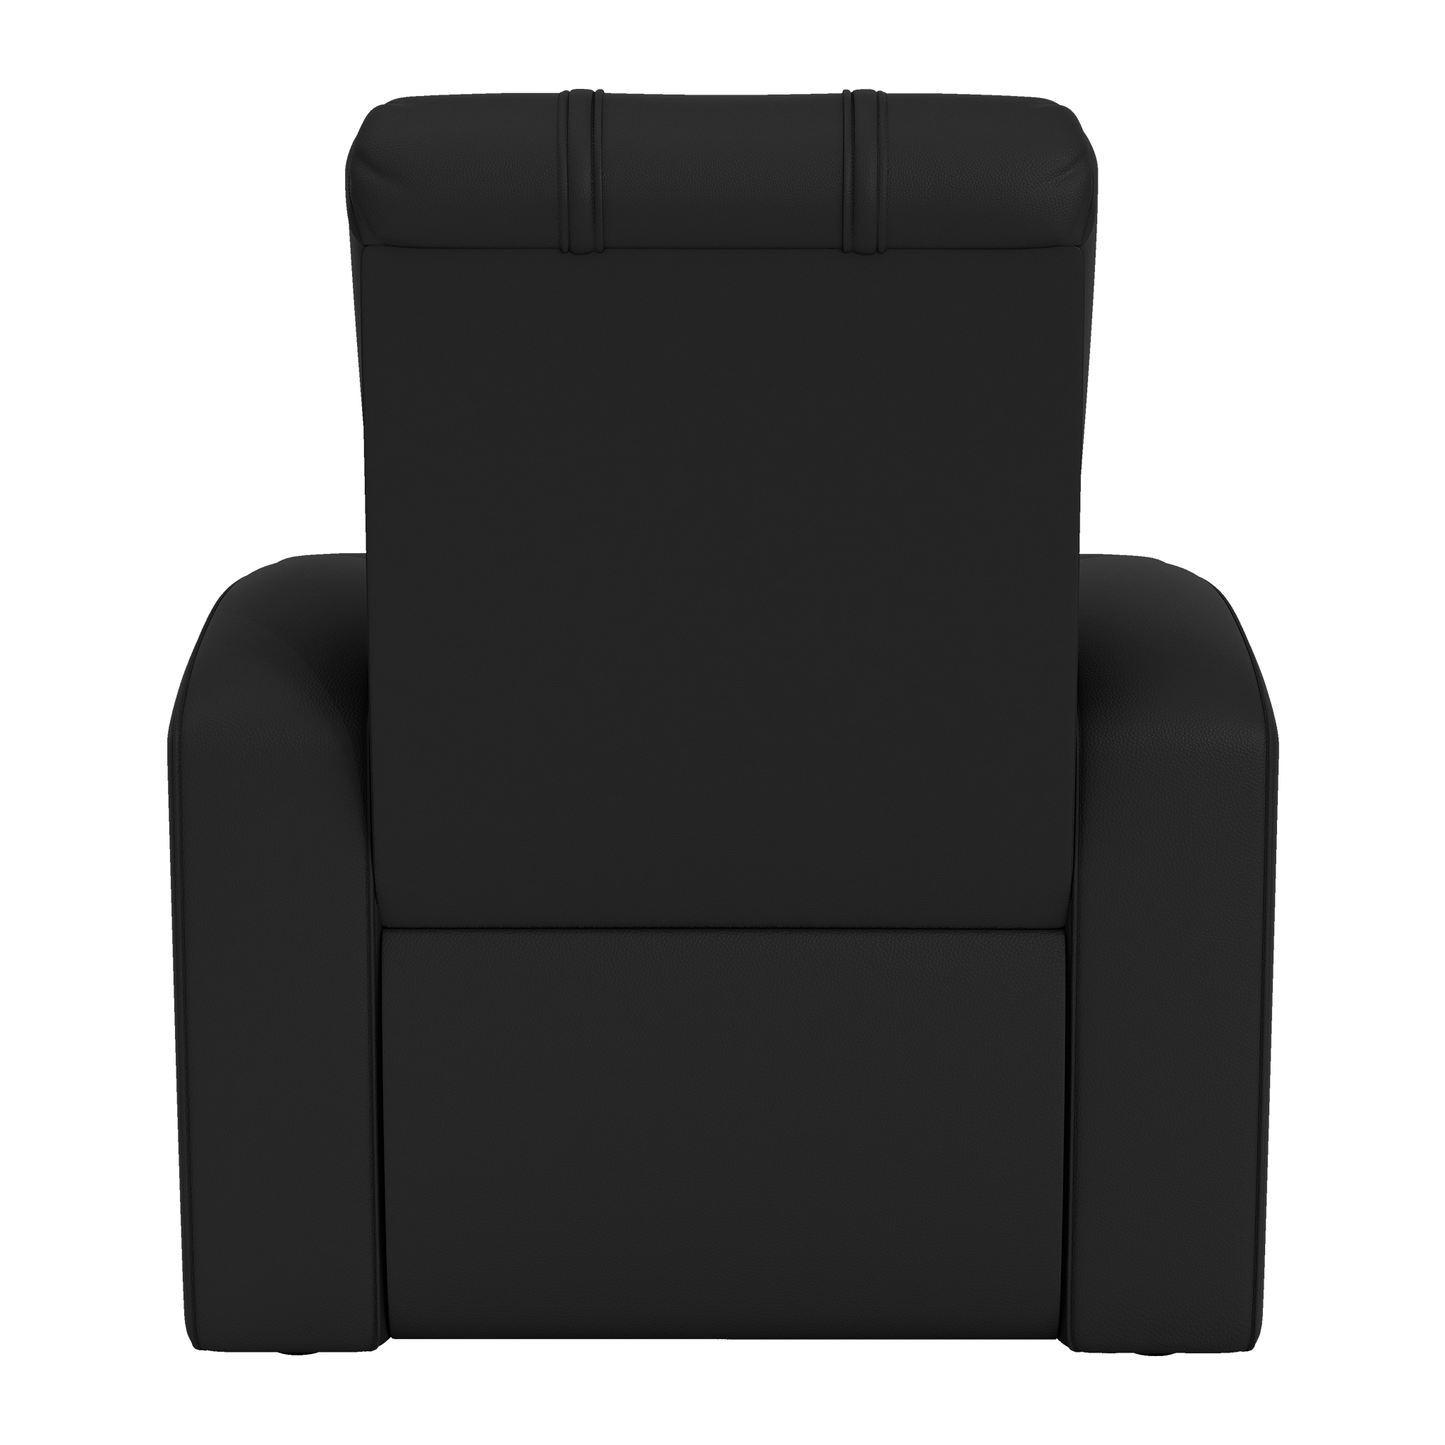 Relax Home Theater Recliner with  New York Jets Secondary Logo